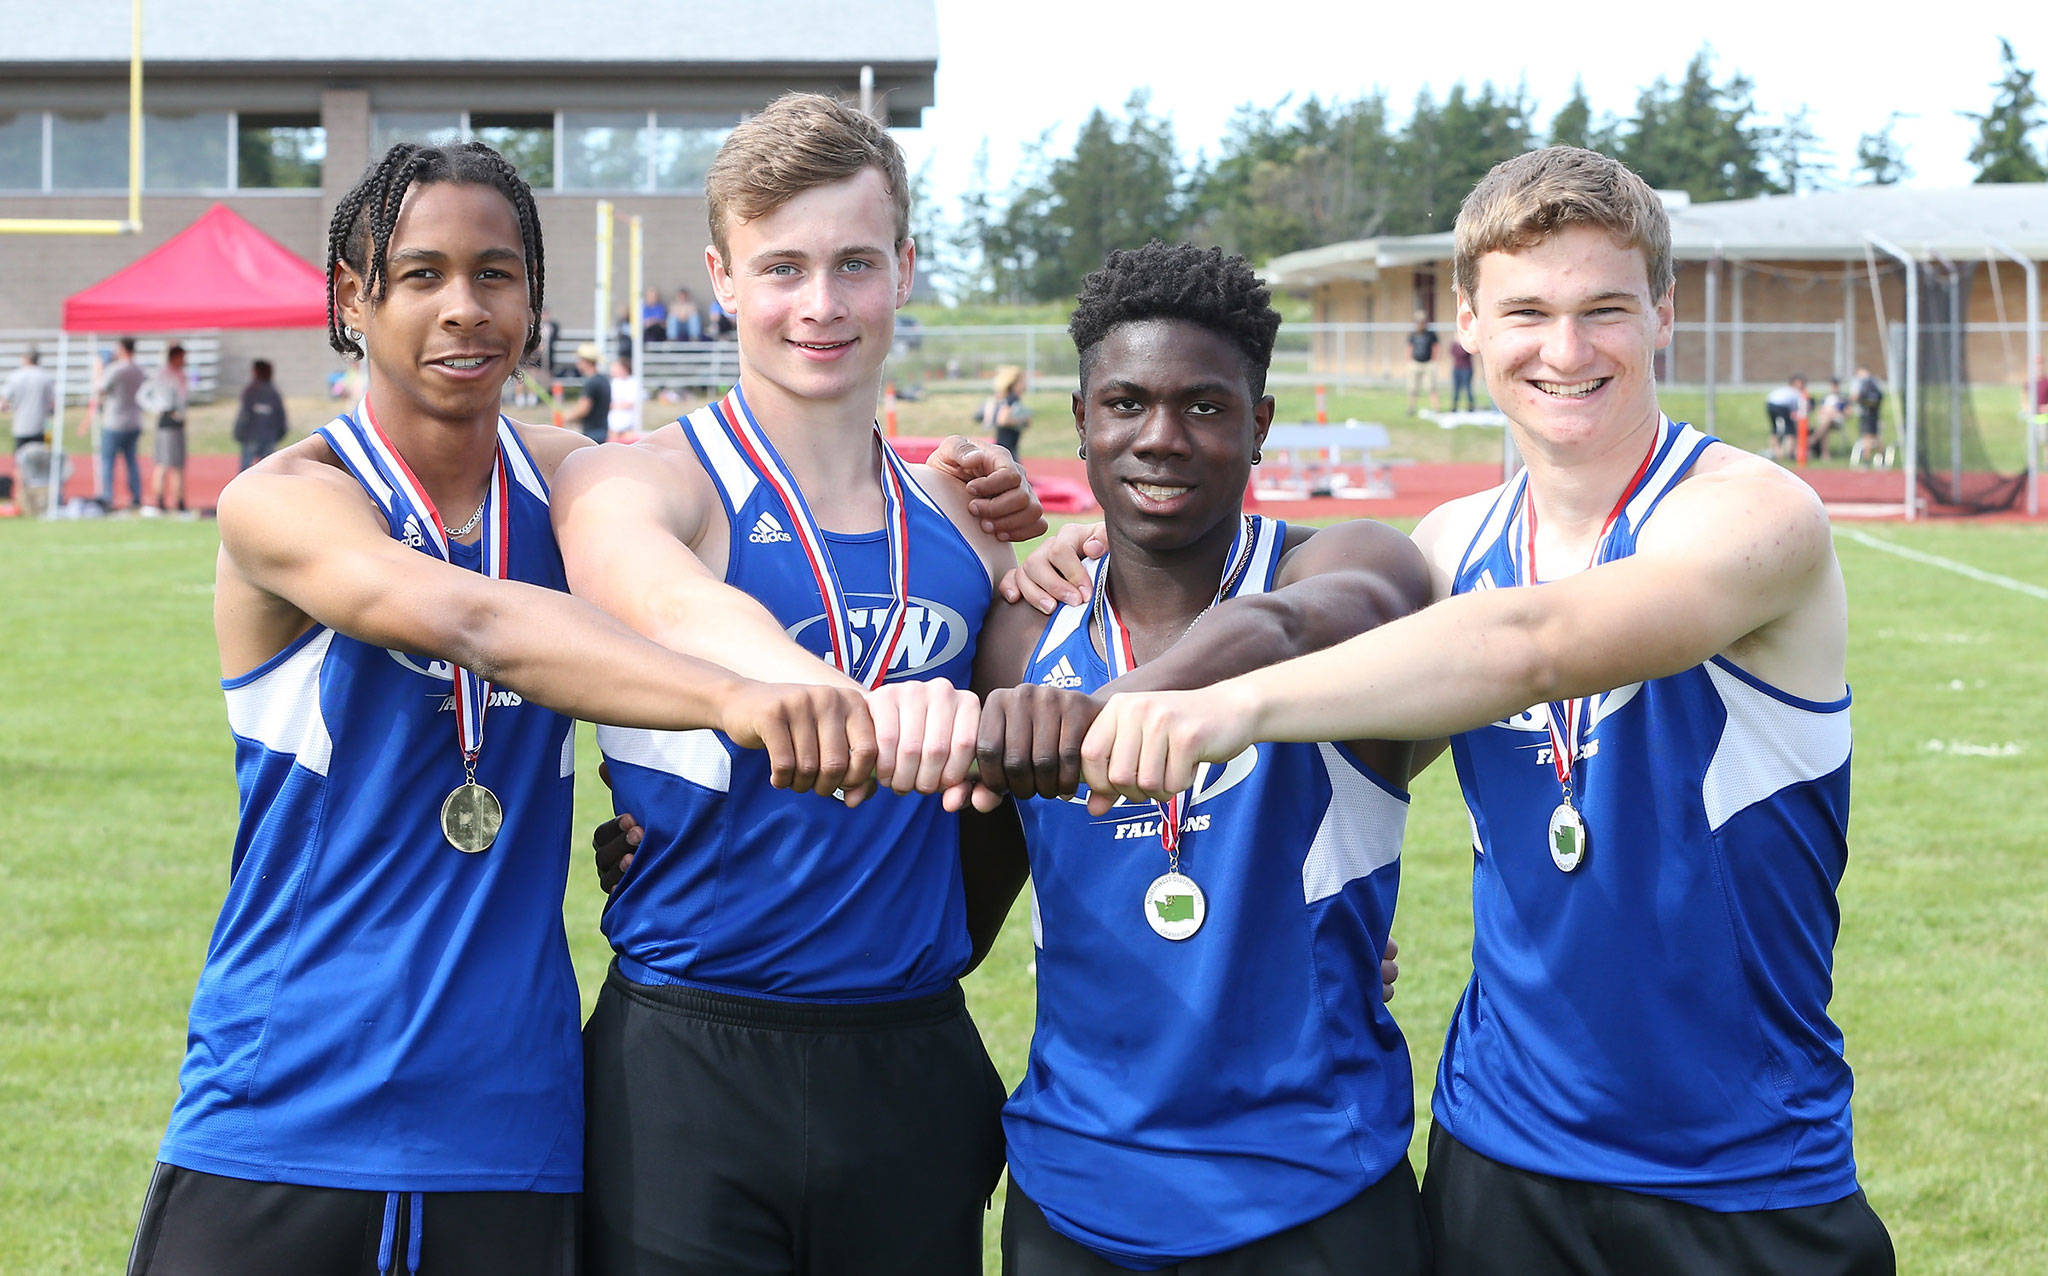 South Whidbey’s boys 4x100 relay team of Issiah Gonzales, left, Bodie Hezel, Carl Henri Chapman and Caden Spear finished first at bi-district and earned a state berth. (Photo by John Fisken)